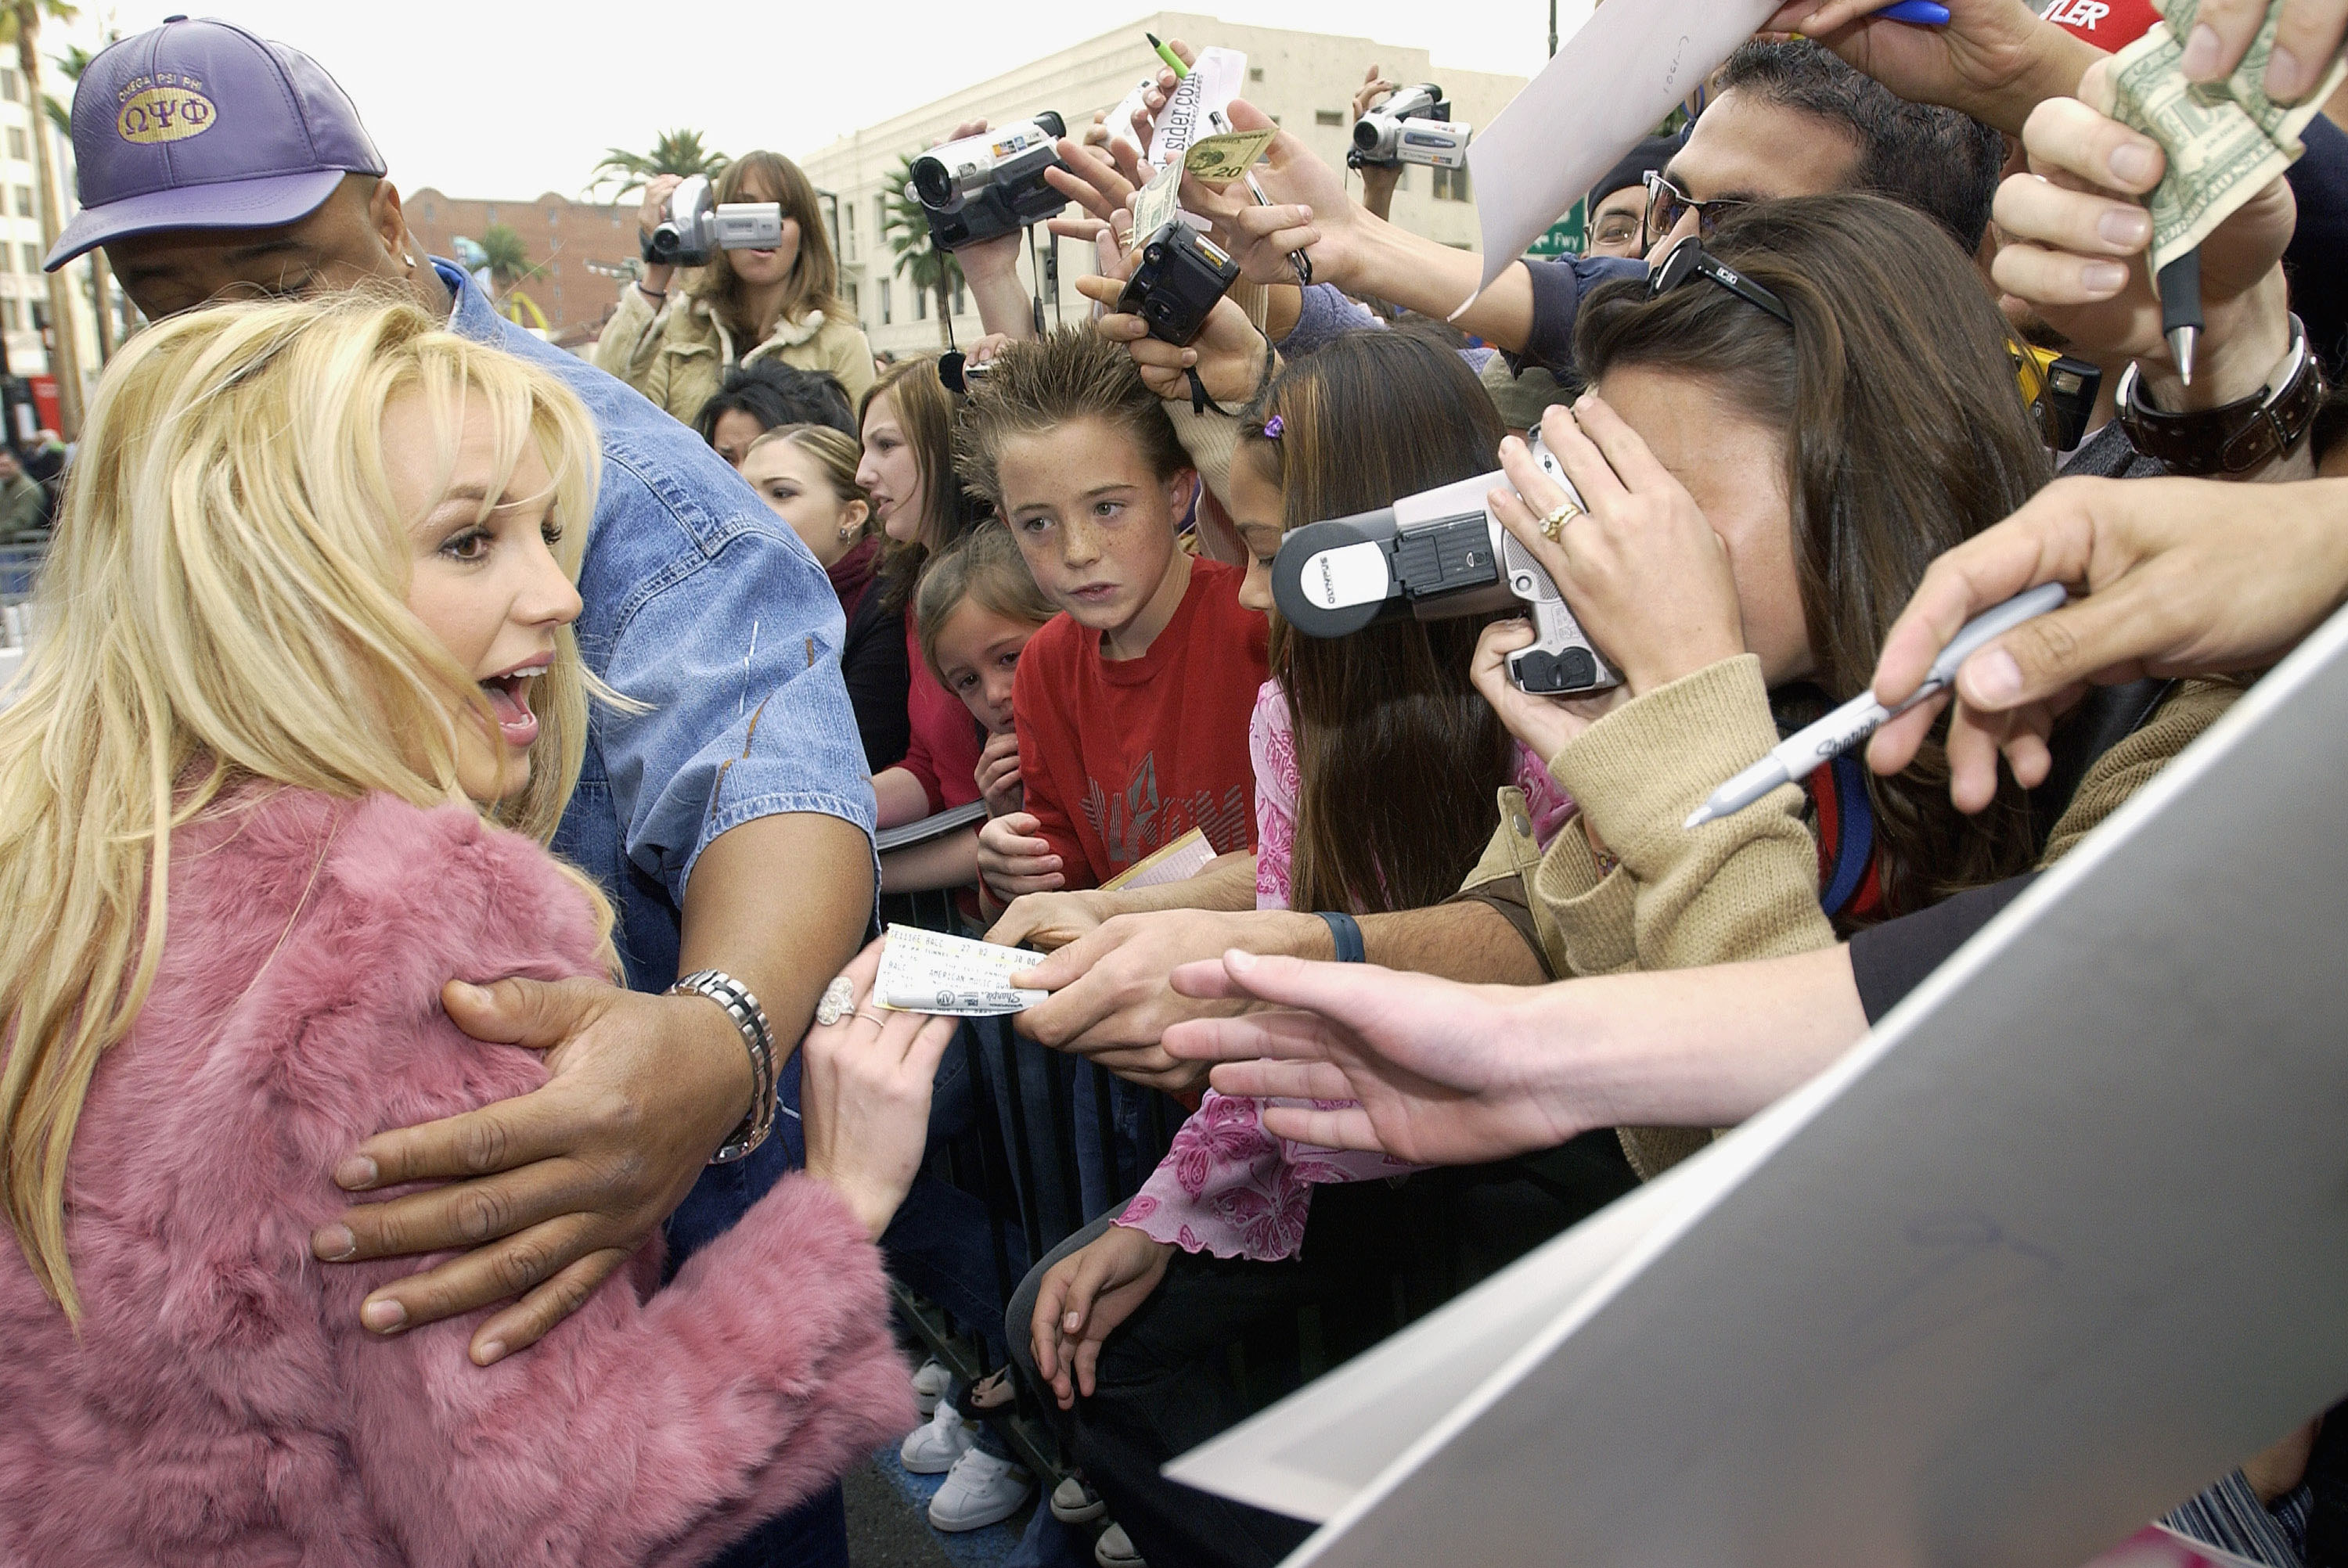 Britney spears being led away from a crowd of fans